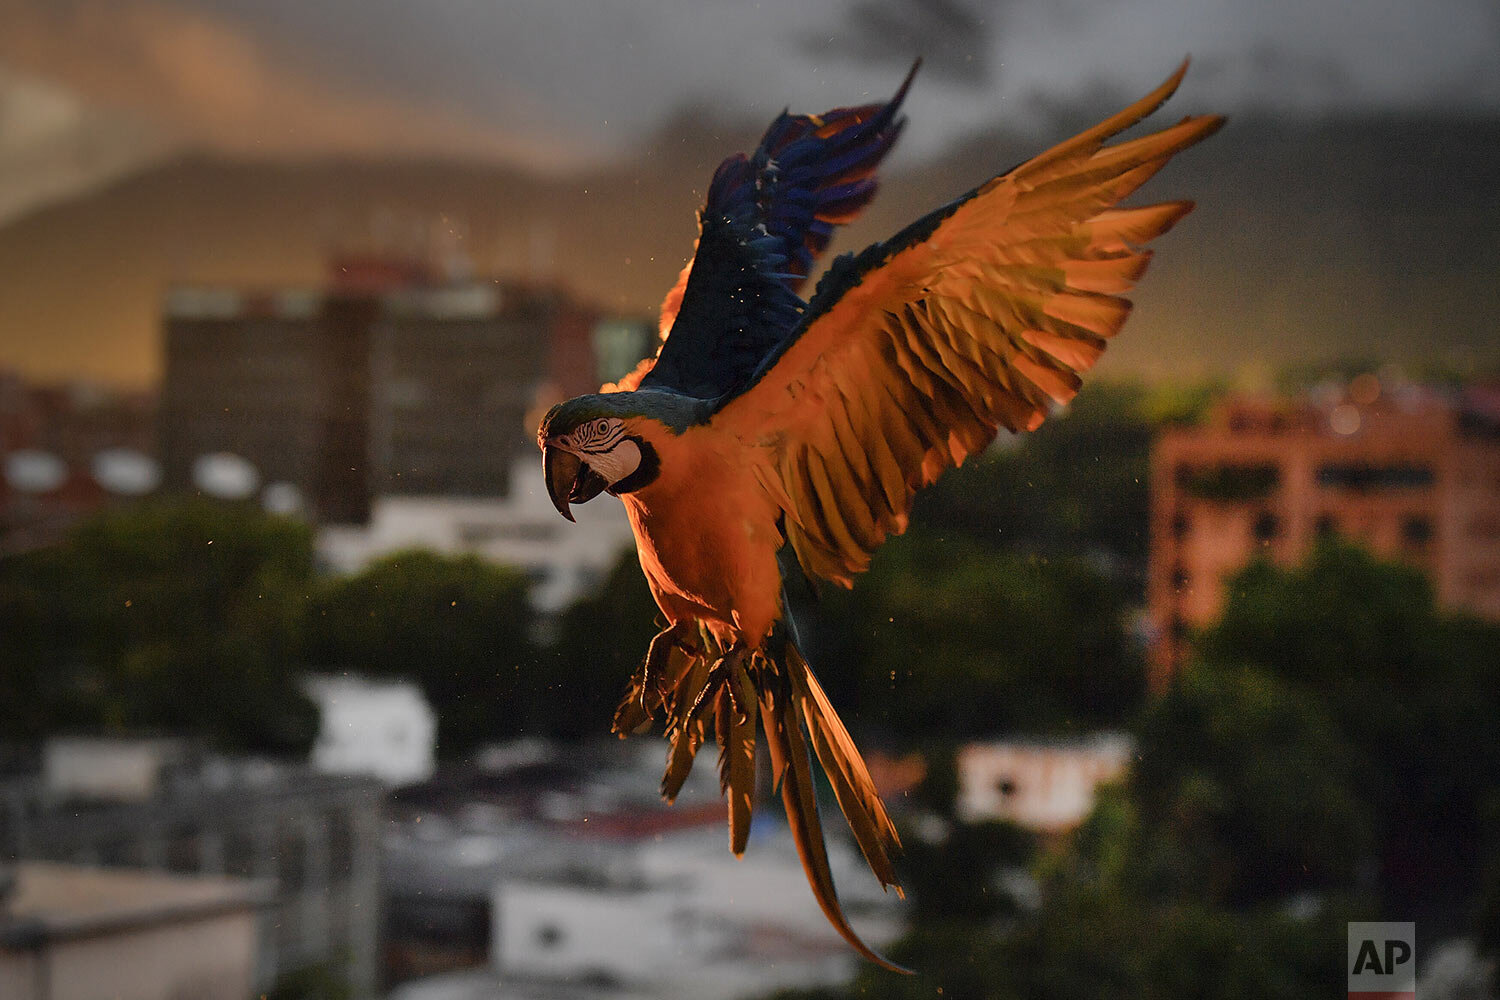  A macaw looks to land on an antenna for food in Caracas, Venezuela, Sept. 5, 2020. Legend has it that Caracas' signature bird was introduced in the 1970s by Italian immigrant Vittorio Poggi, who says he nurtured a lost macaw and trained it to fly wi